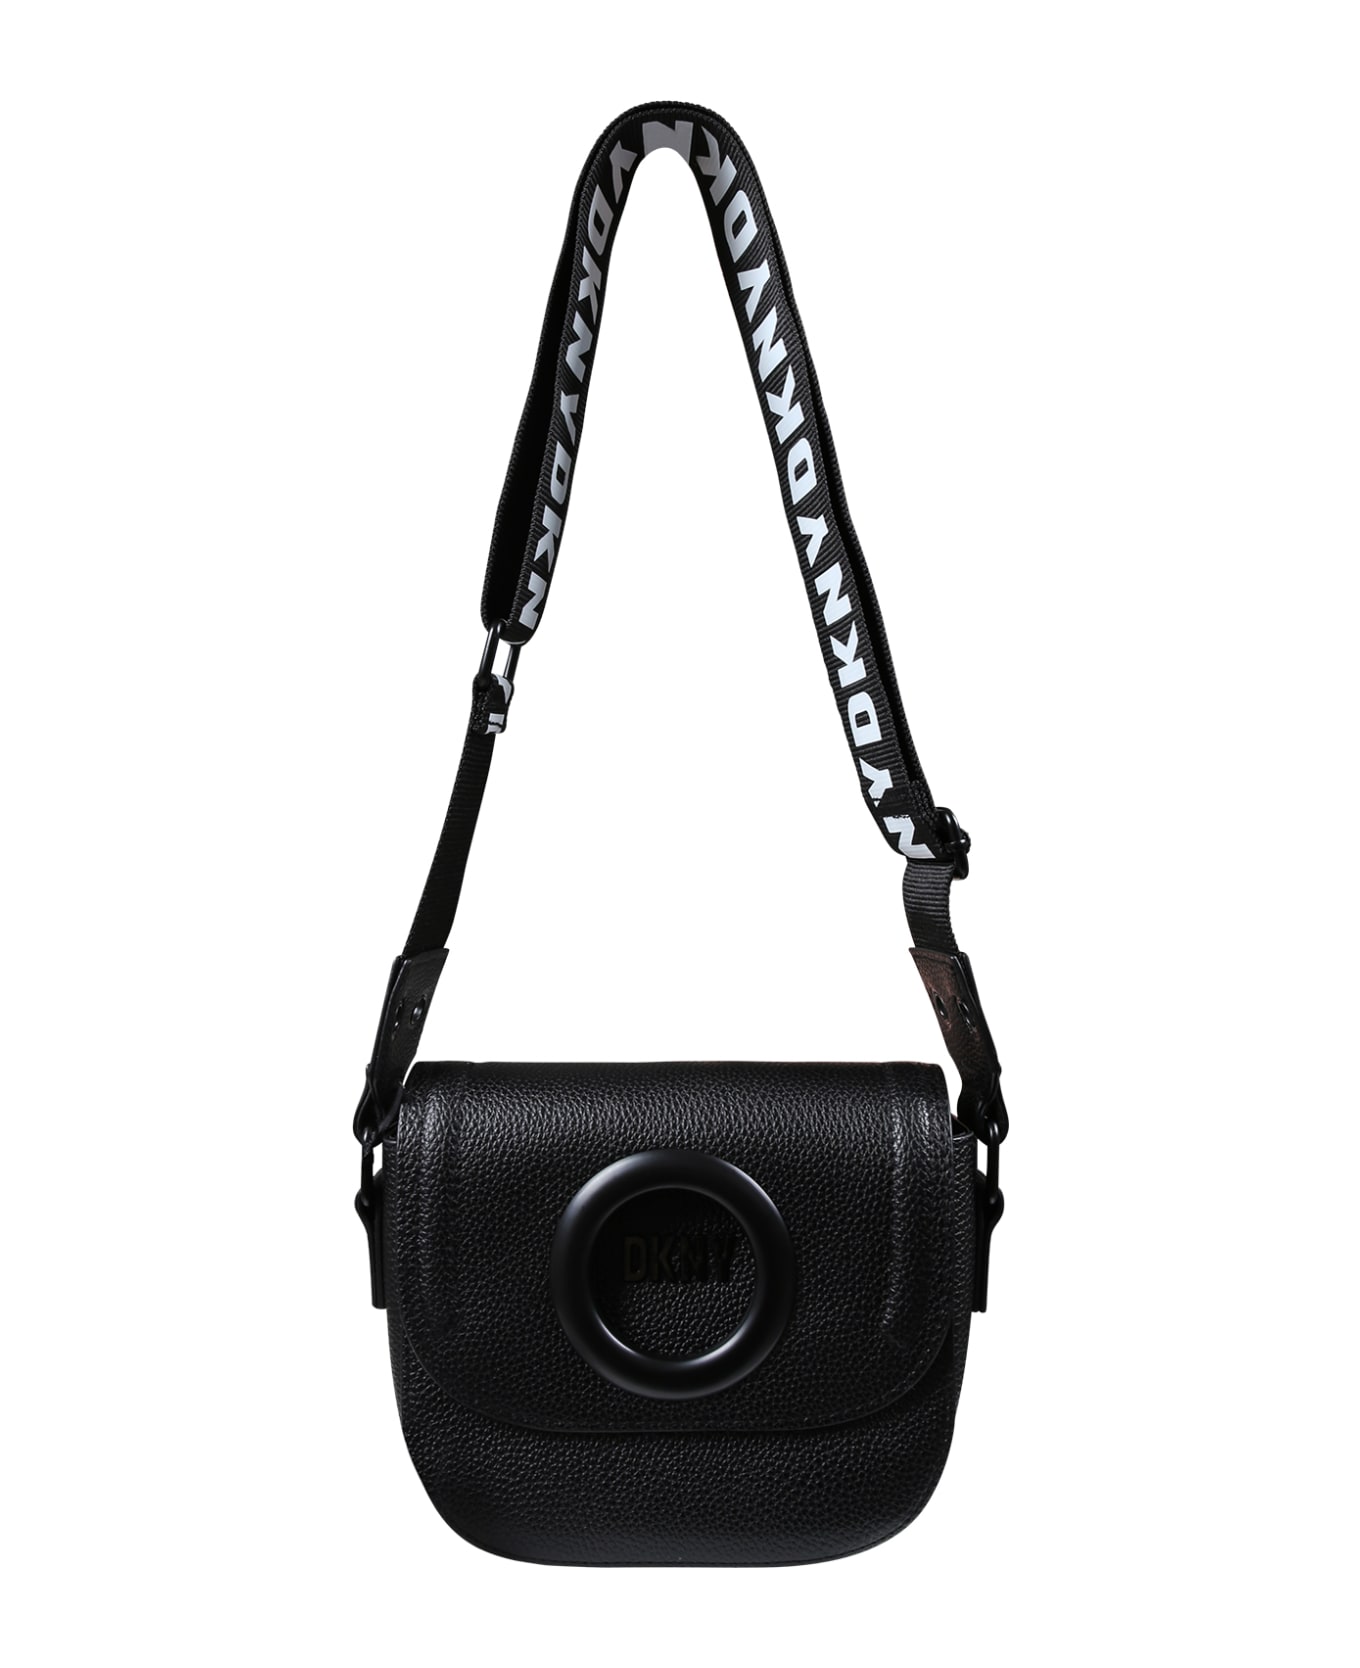 DKNY Black Bag For Girl With Logo - B Nero アクセサリー＆ギフト